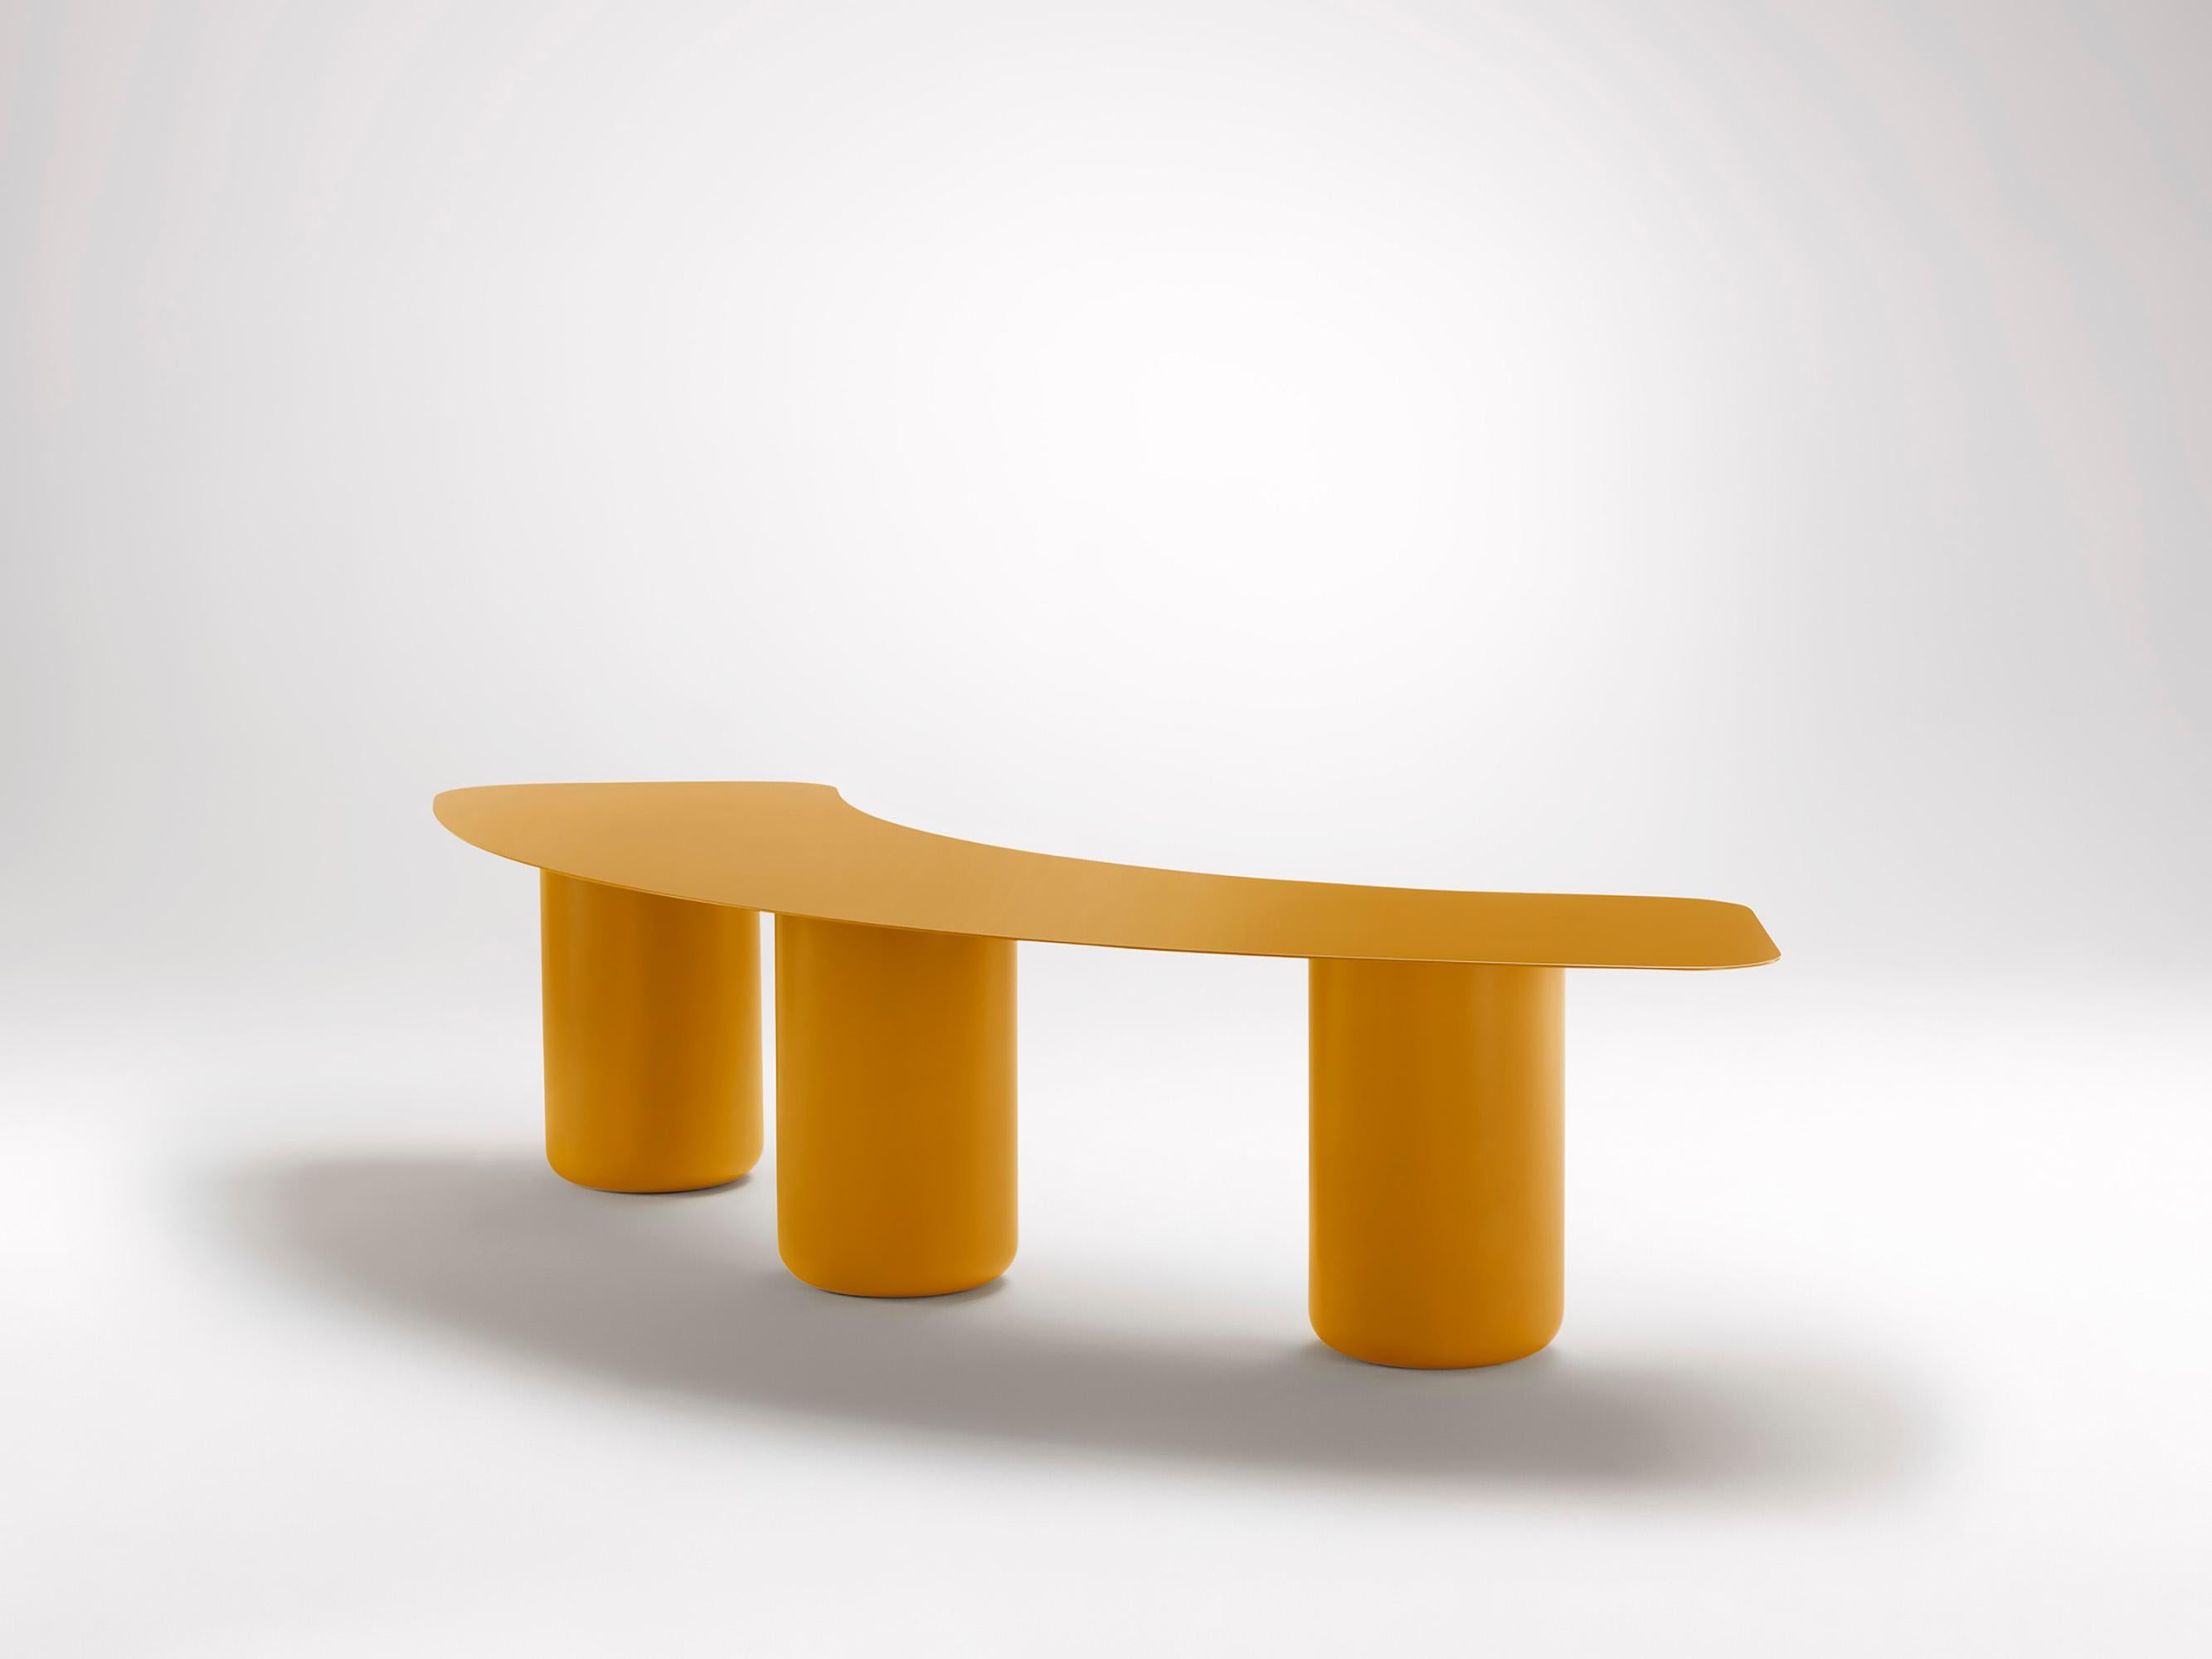 Large Sunshine Yellow Curved Bench by Coco Flip
Dimensions: D 75 x W 200 x H 42 cm
Materials: Mild steel, powder-coated with zinc undercoat. 
Weight: 44 kg

Coco Flip is a Melbourne based furniture and lighting design studio, run by us, Kate Stokes